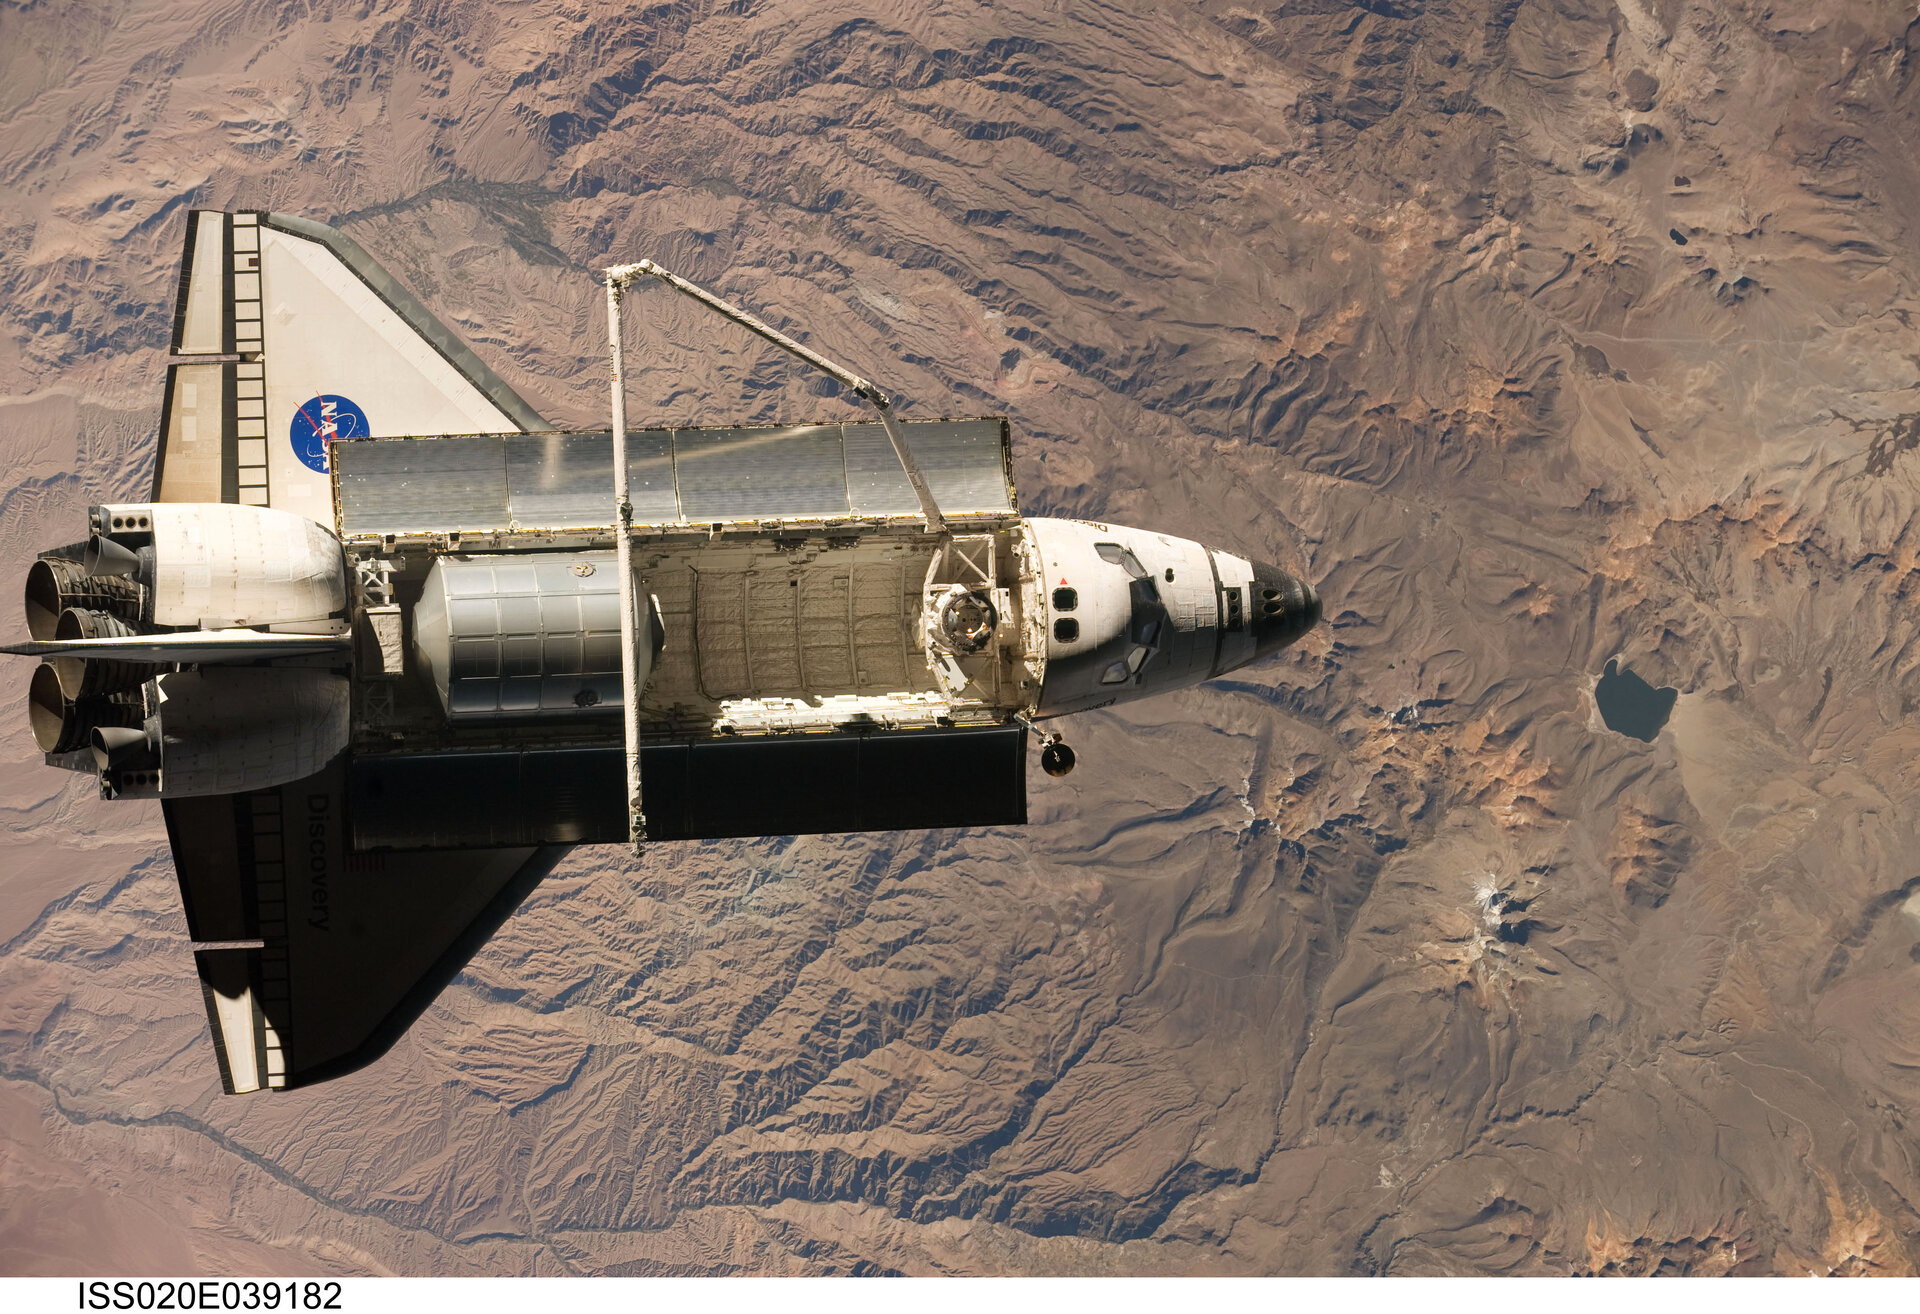 Space Shuttle Discovery during the STS-128 mission shortly after undocking from the ISS